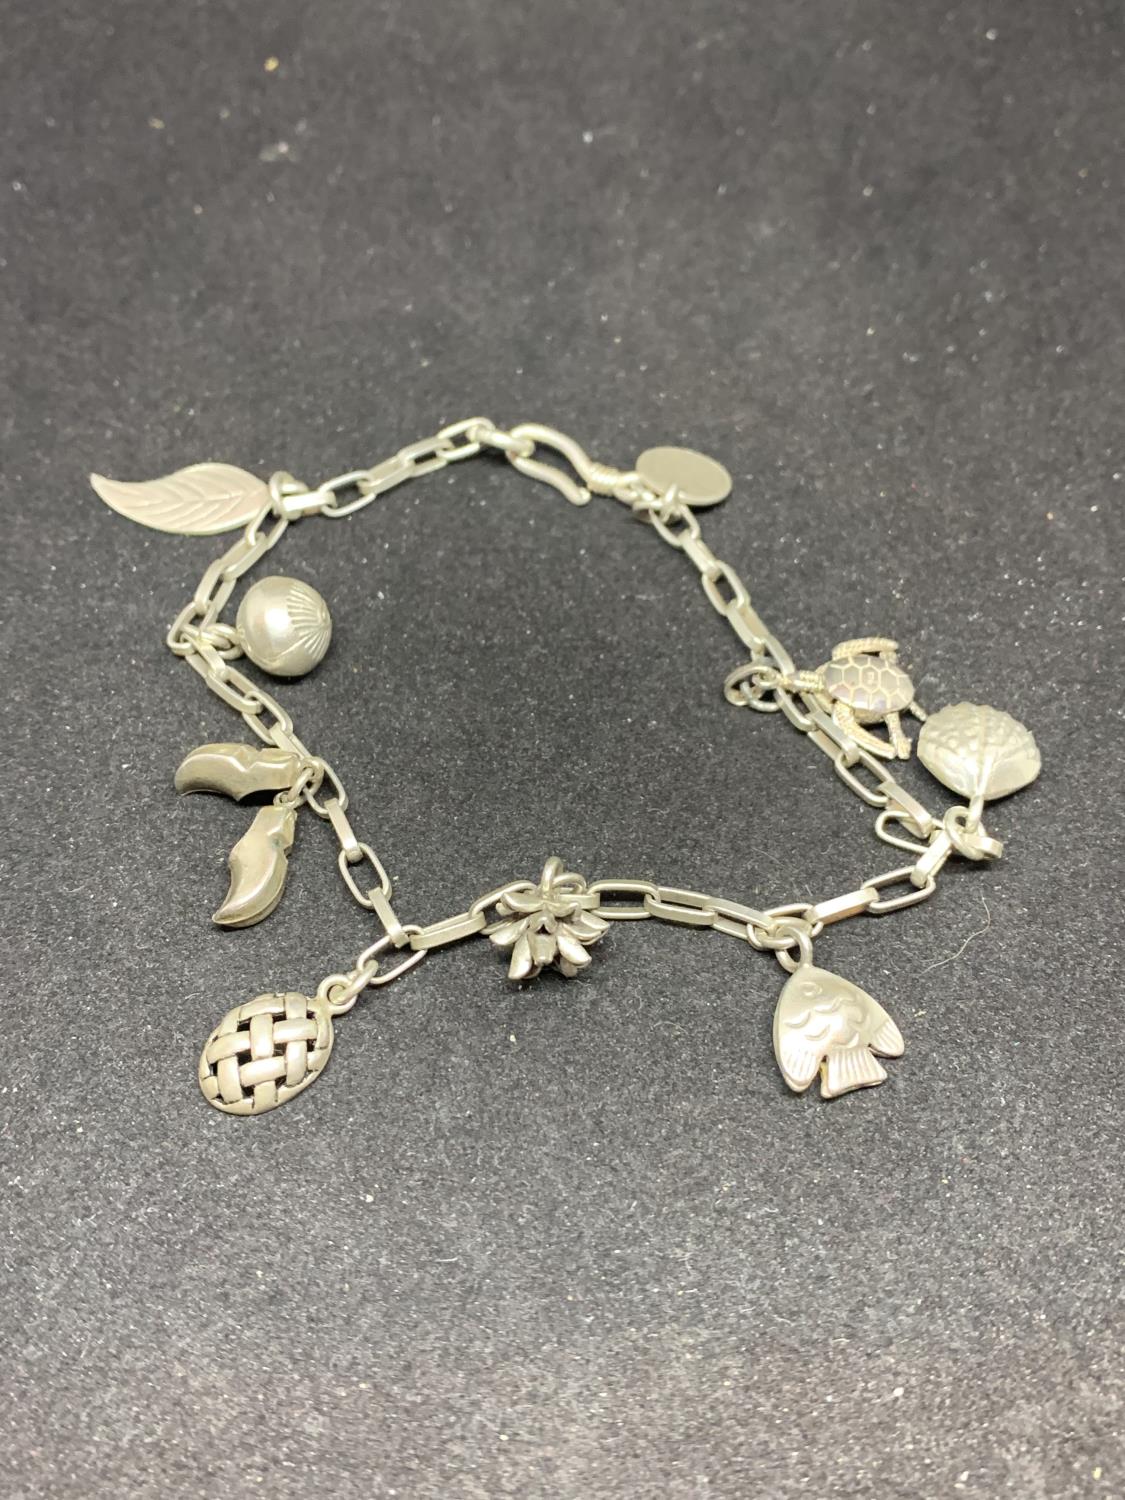 A SILVER CHARM BRACELET WITH NINE CHARMS TO INCLUDE CLOGS, FEATHERS, TURTLE, FISH, SHELL ETC